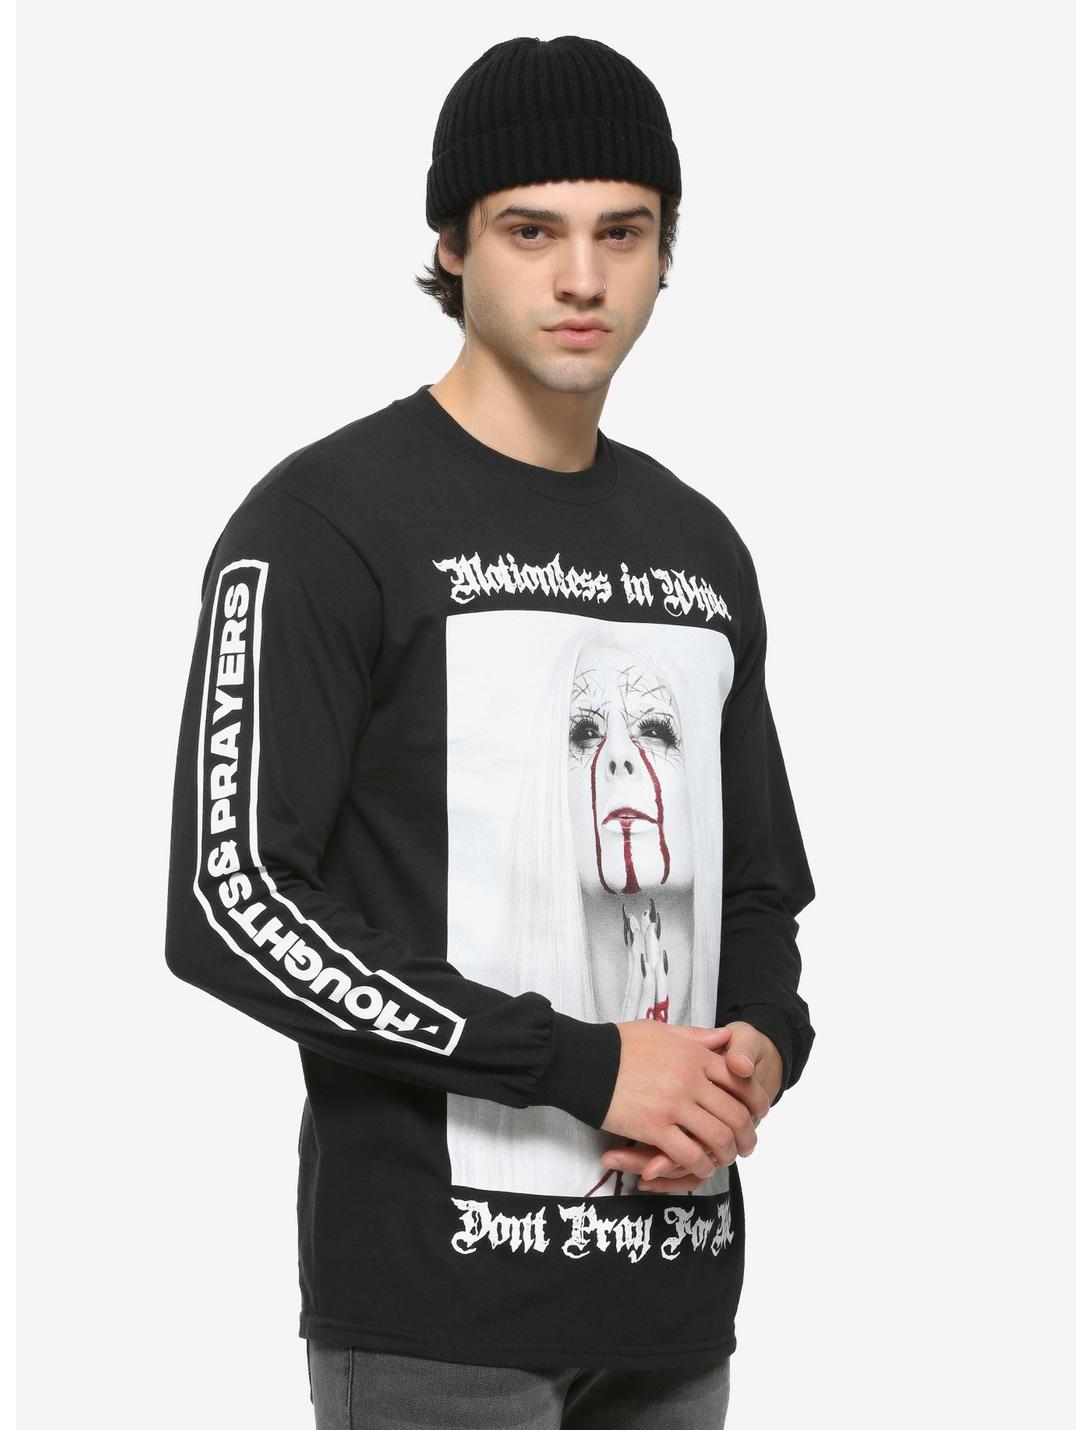 Motionless In White Thoughts & Prayers Long-Sleeve T-Shirt, BLACK, hi-res